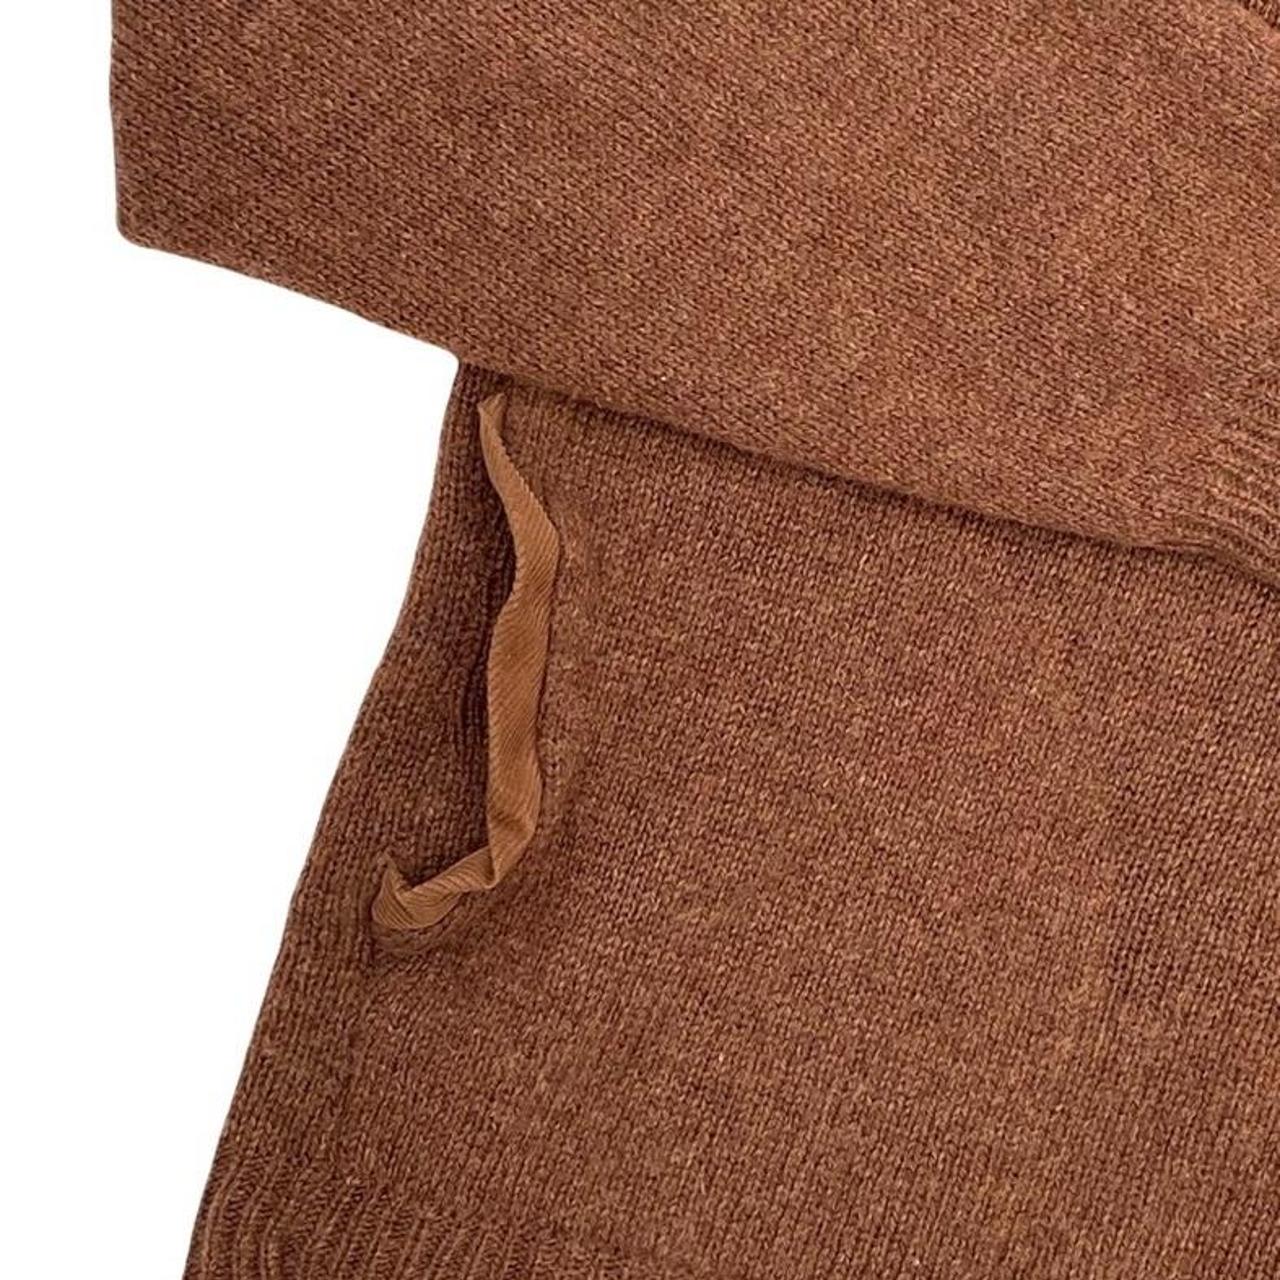 Product Image 4 - Vintage JCPenney oversized brown sweater